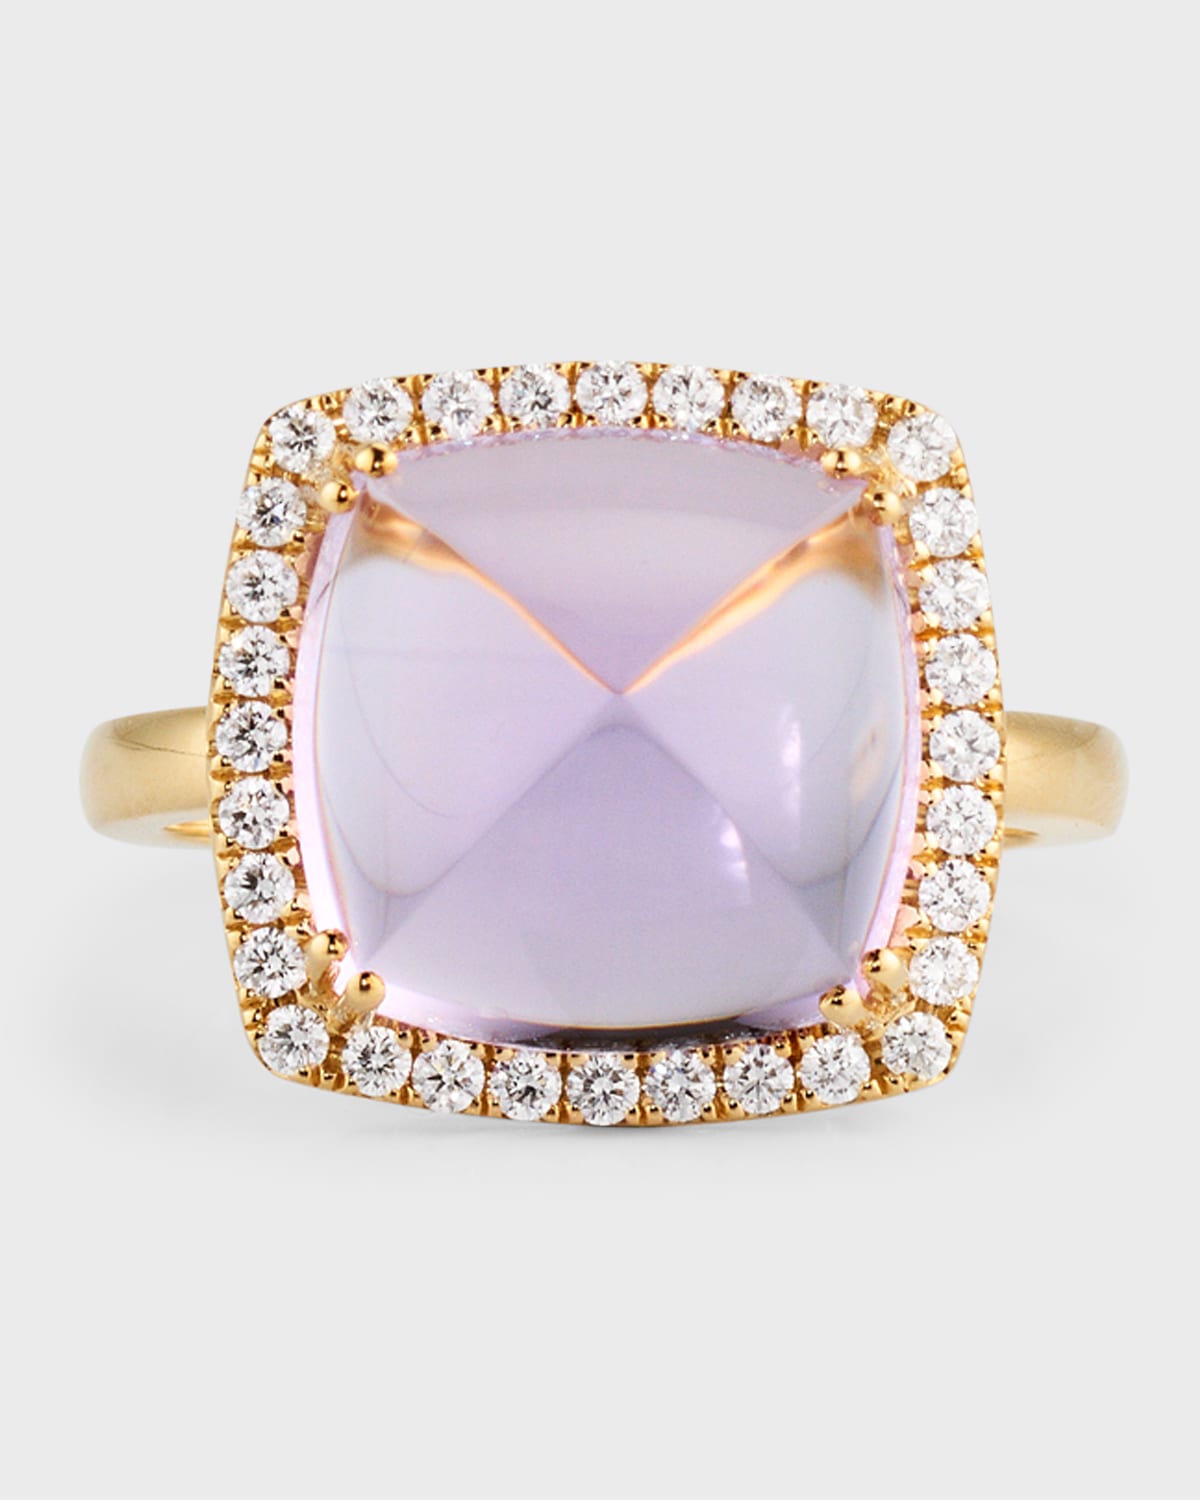 18K Yellow Gold Ring with Amethyst and Diamonds, Size 7, 8.44tcw